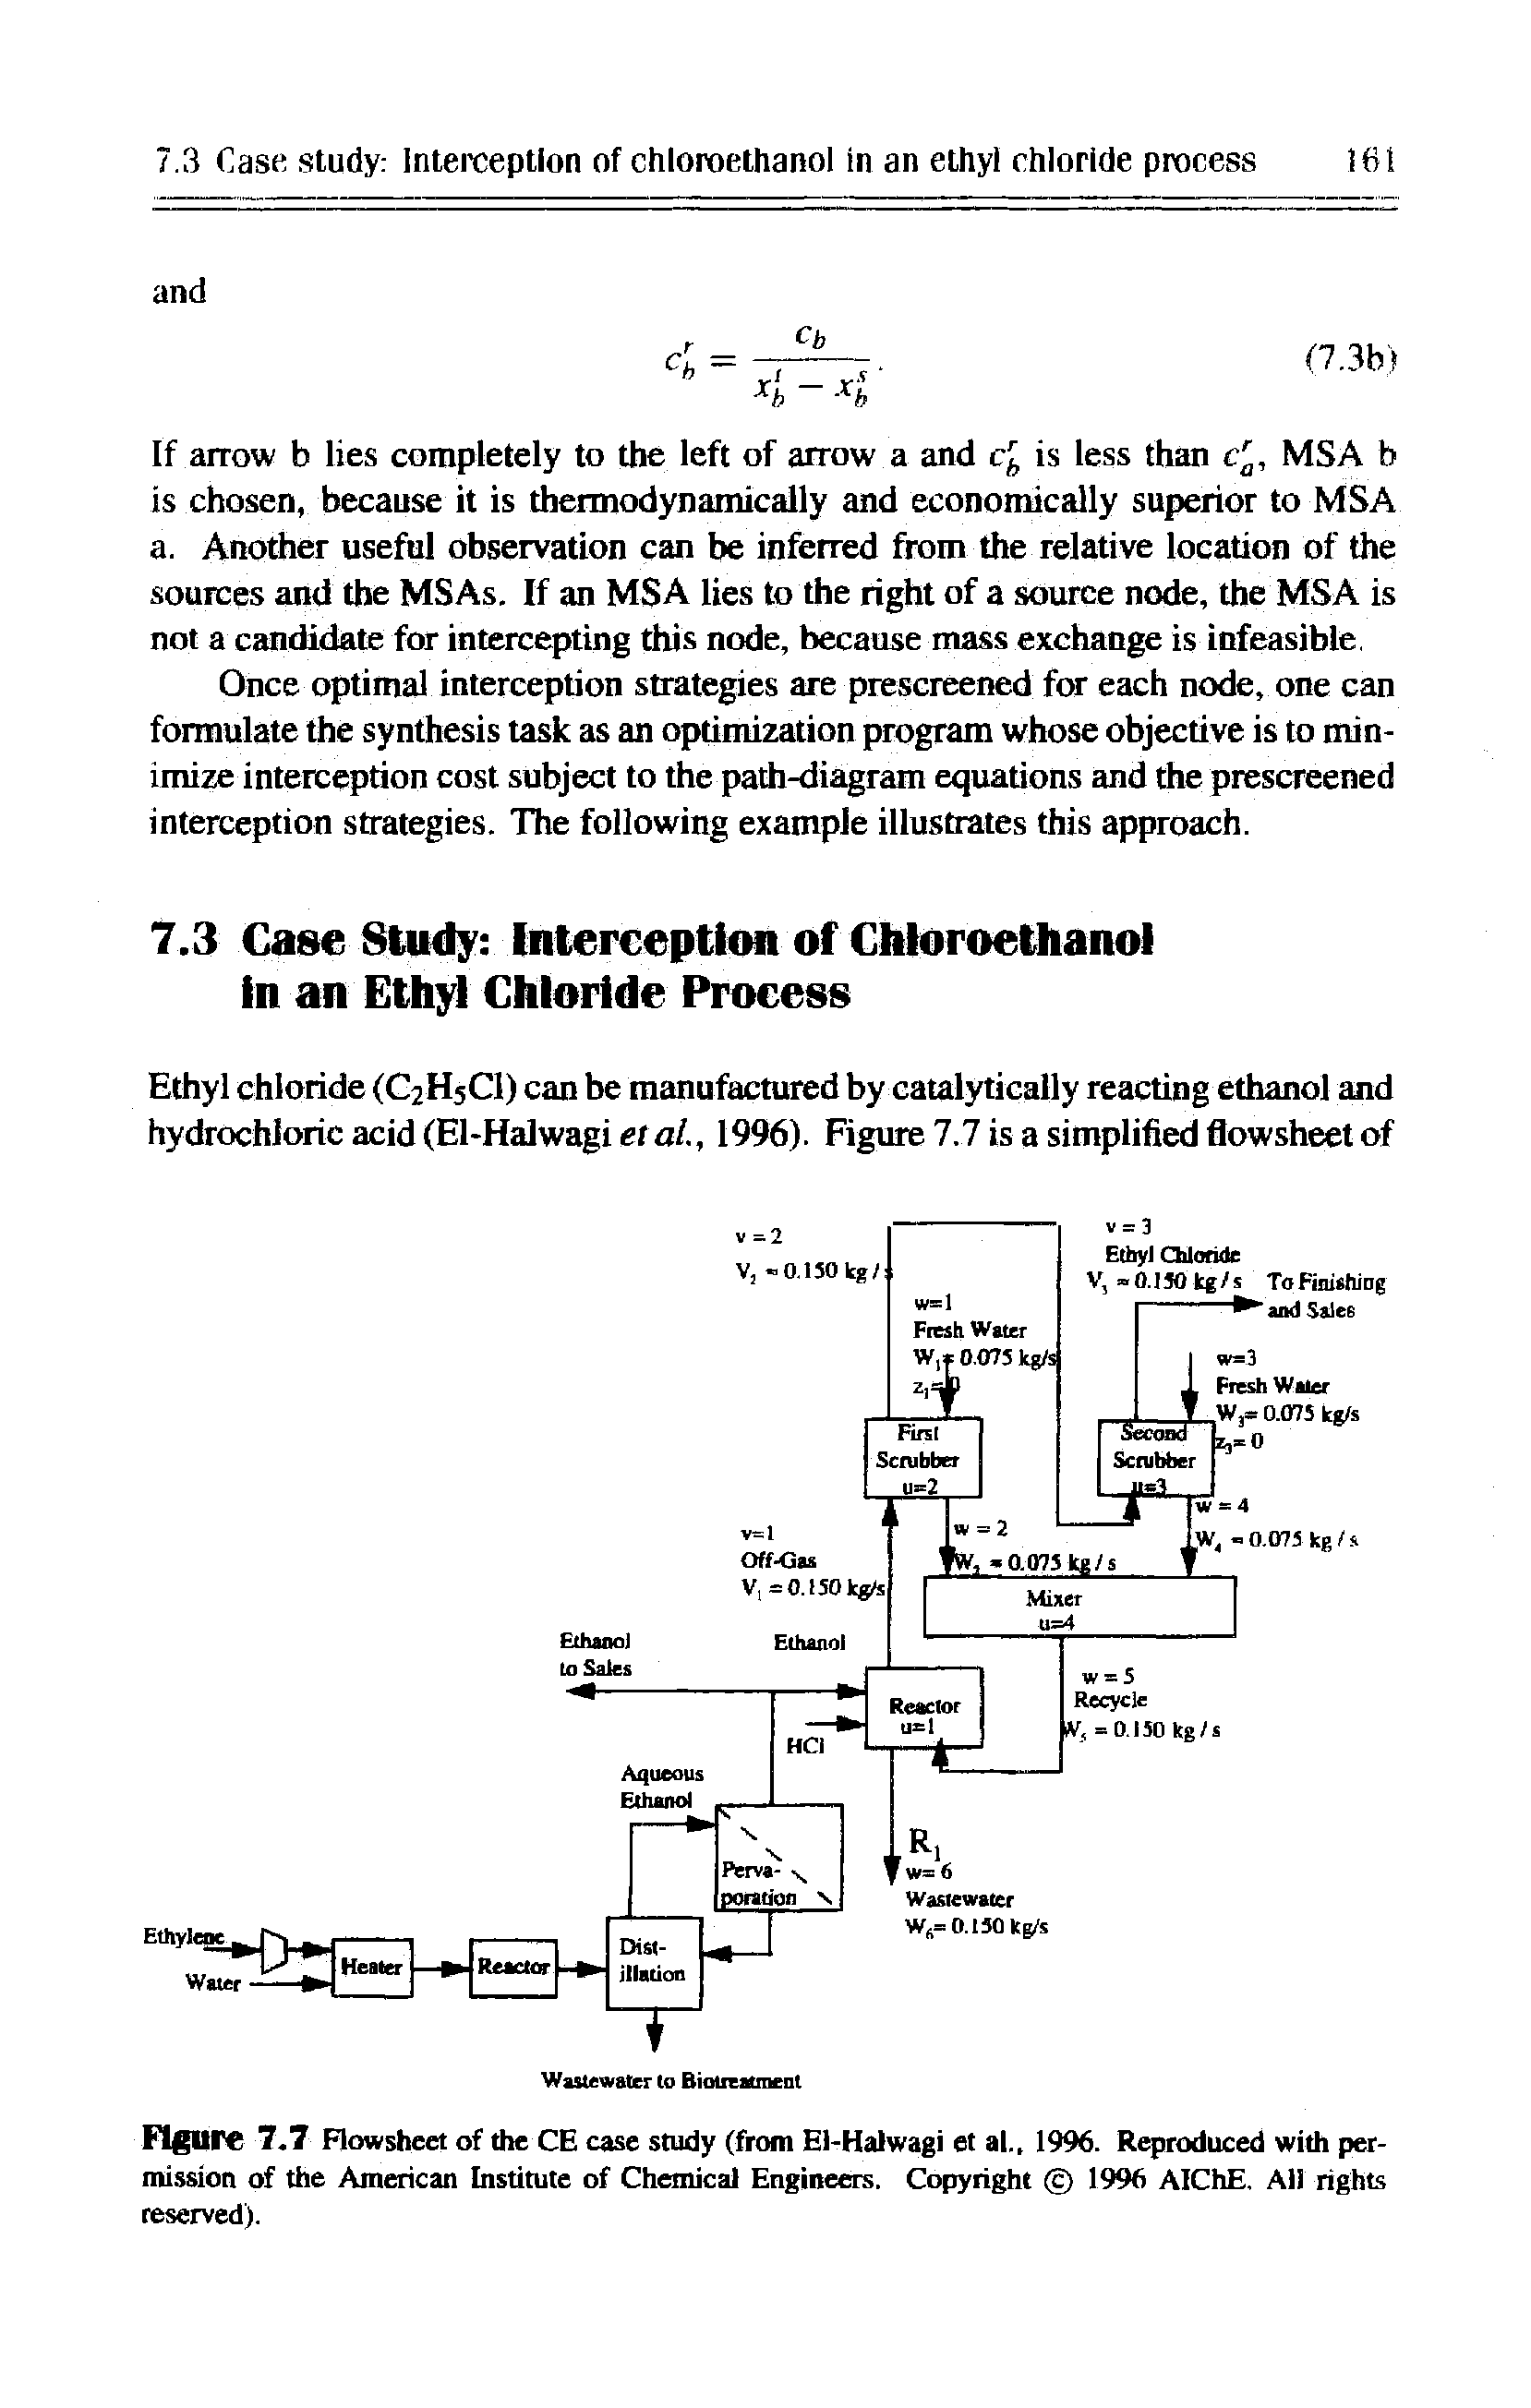 Figure 7.7 Flowsheet of the CE case study (from El-Halwagi et at, 1996. Reproduced with permission of the American Institute of Chemical Engineers. Copyright 1996 AIChE, All rights reserved).